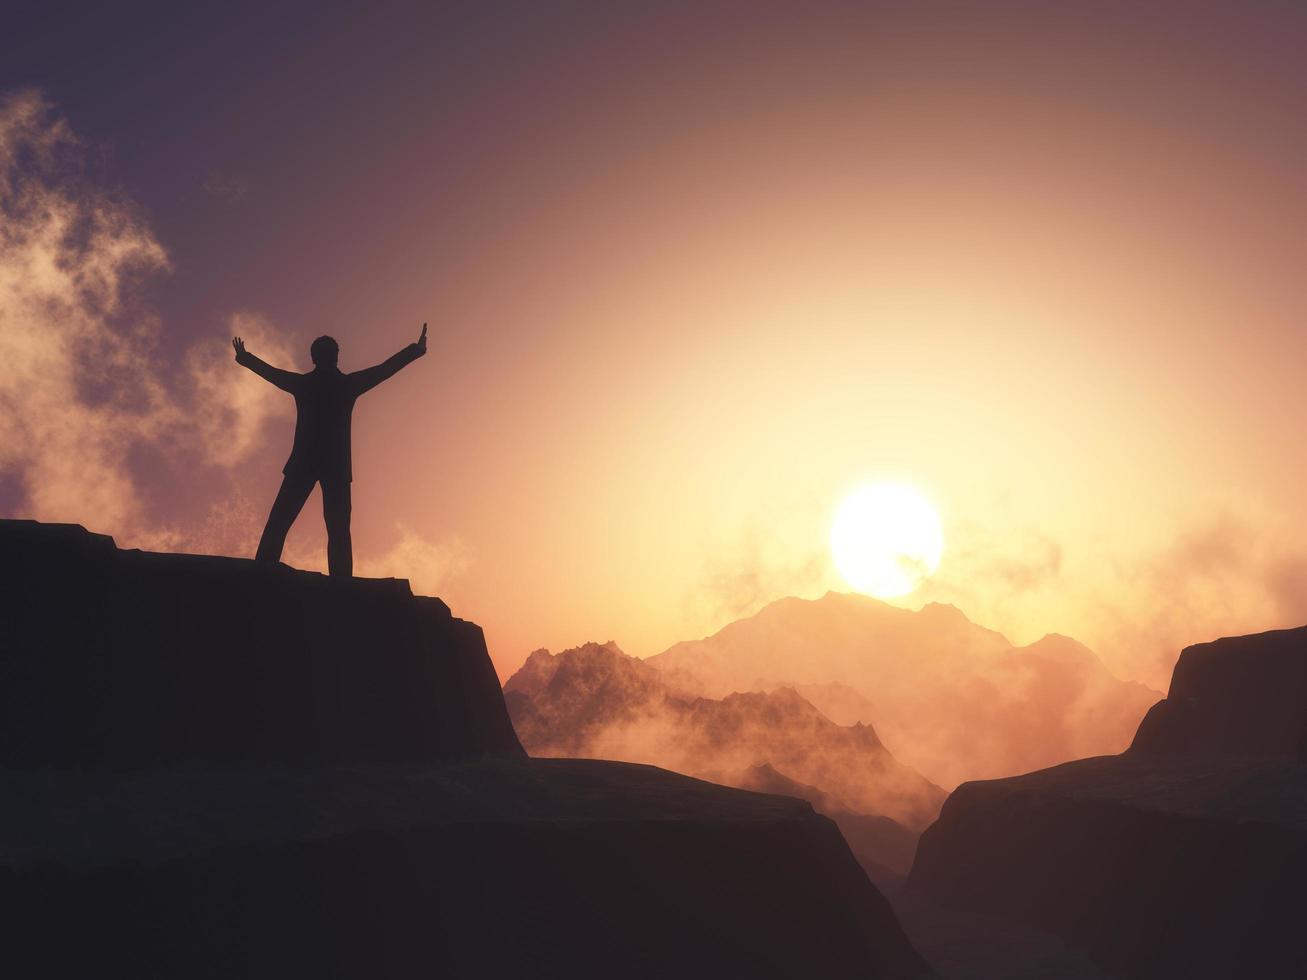 3D male figure with arms raised stood on mountain against sunset sky photo